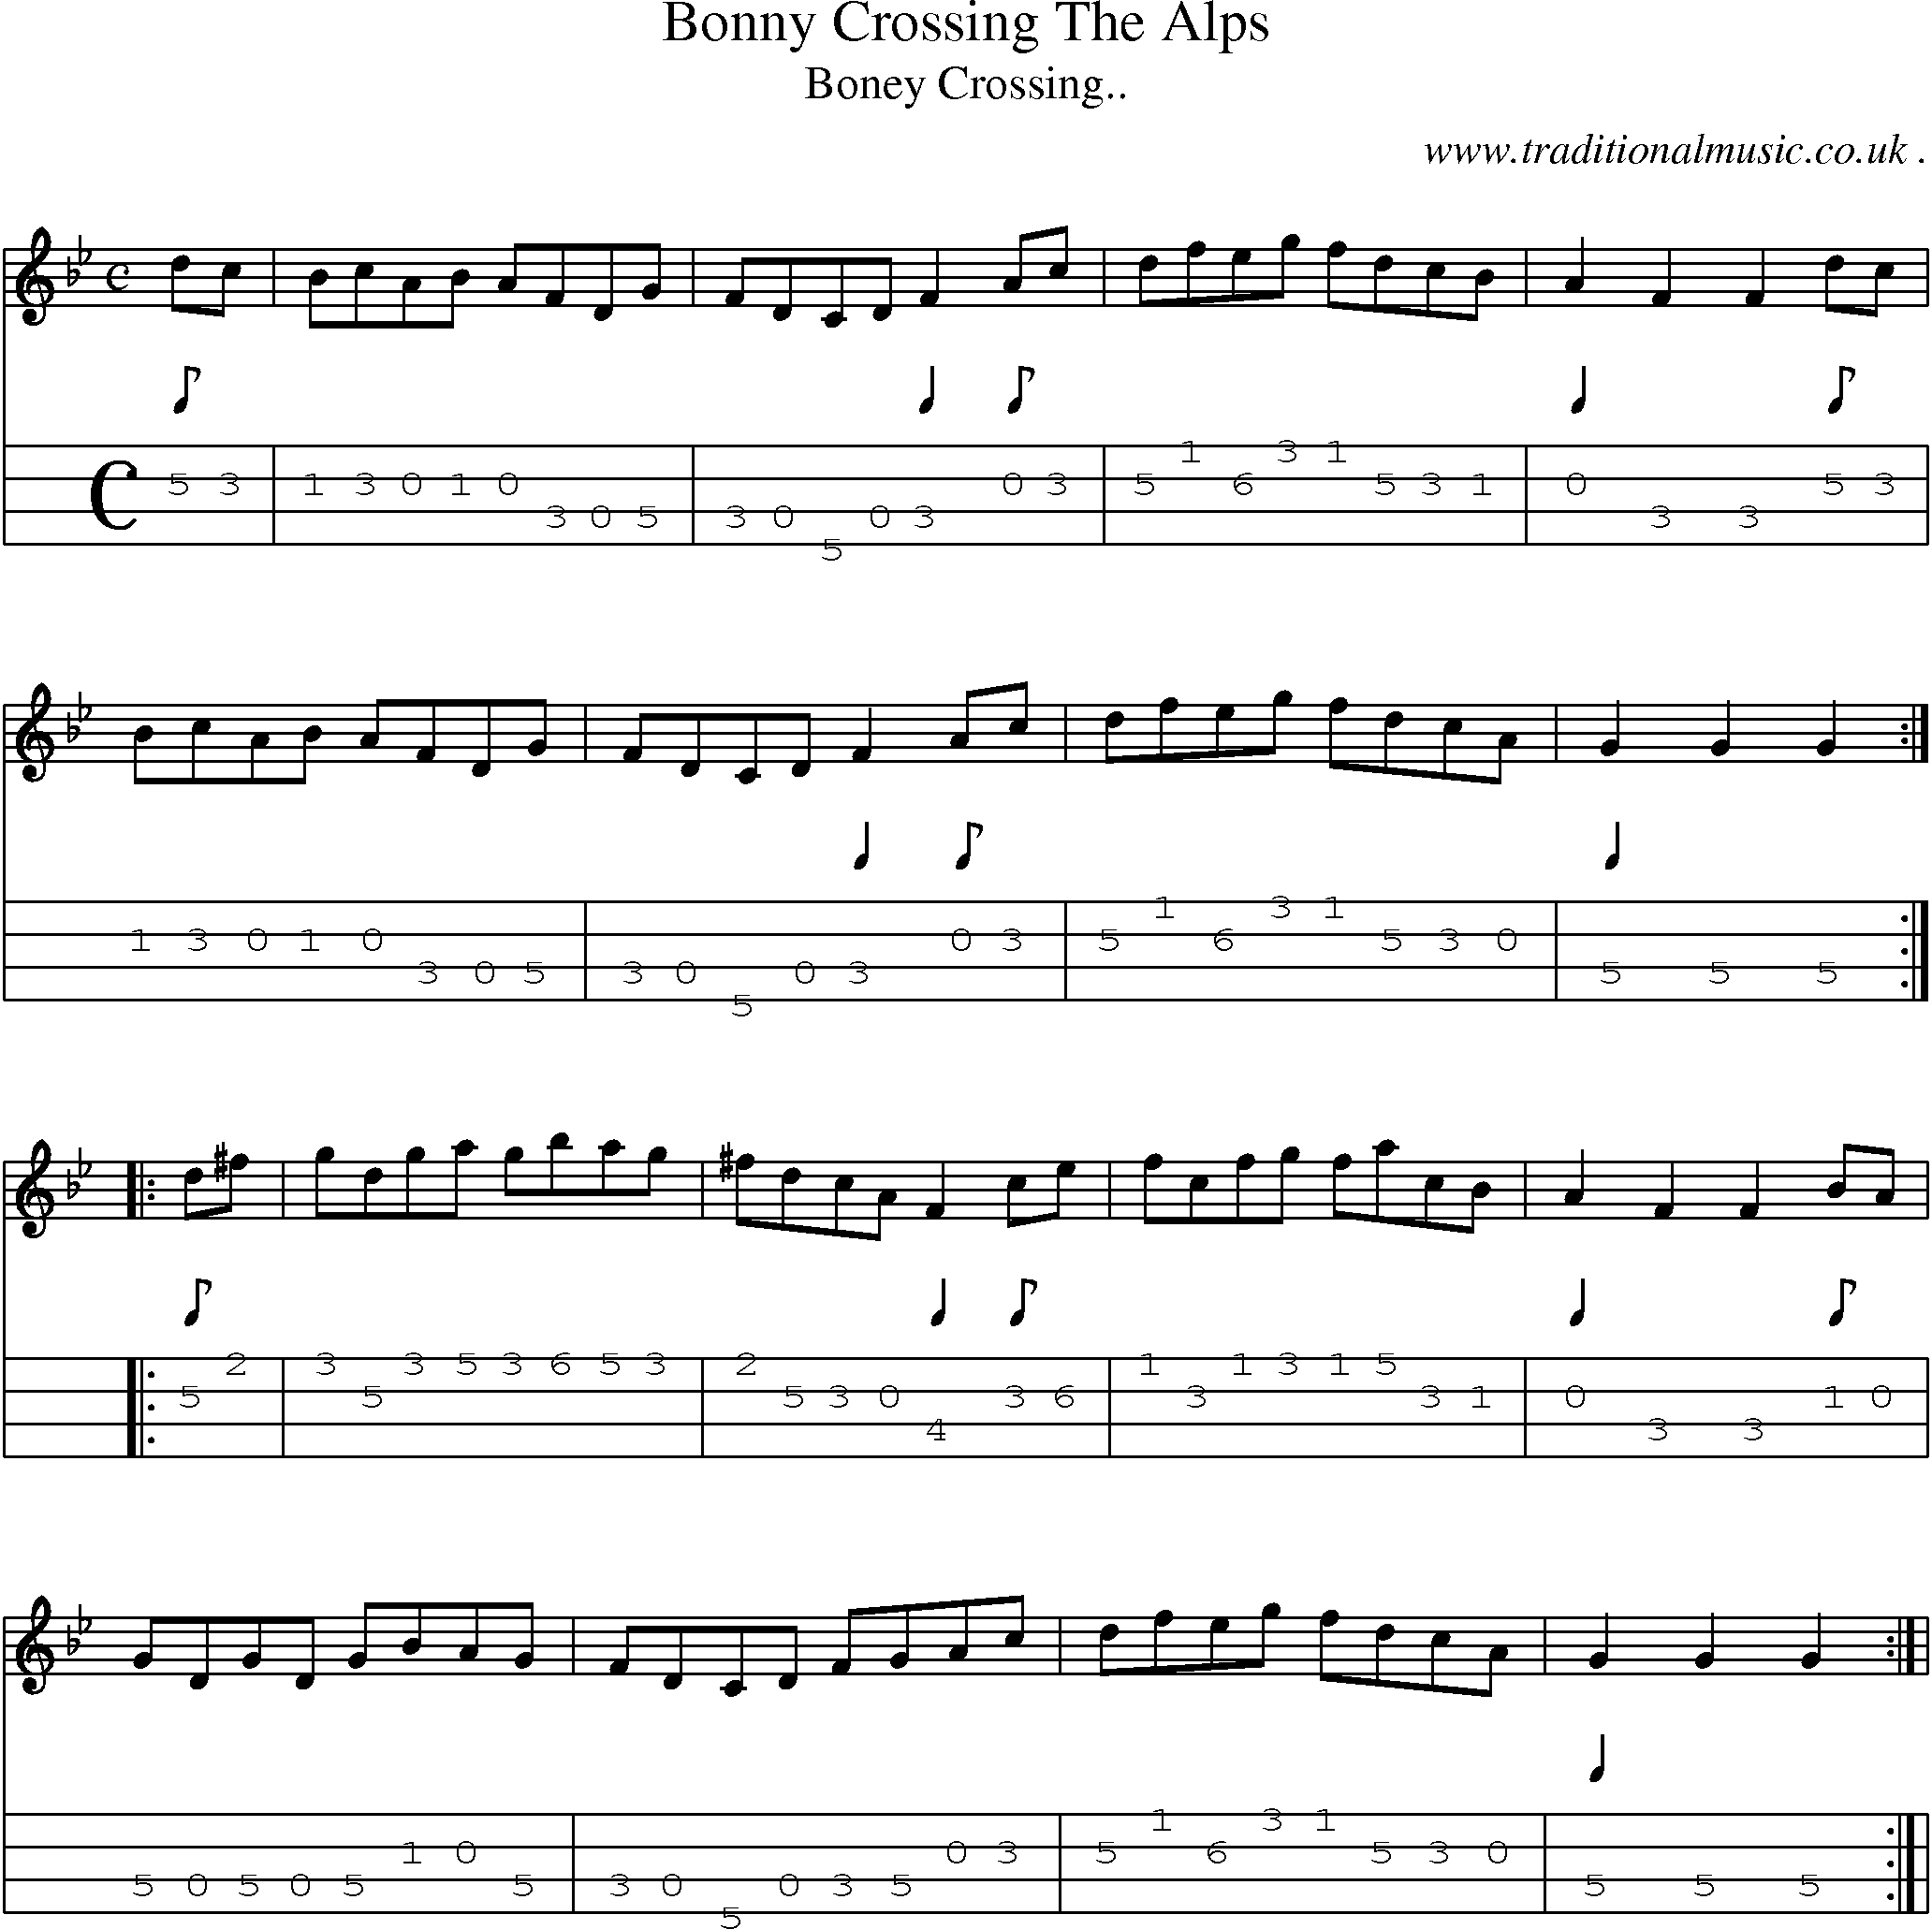 Sheet-Music and Mandolin Tabs for Bonny Crossing The Alps